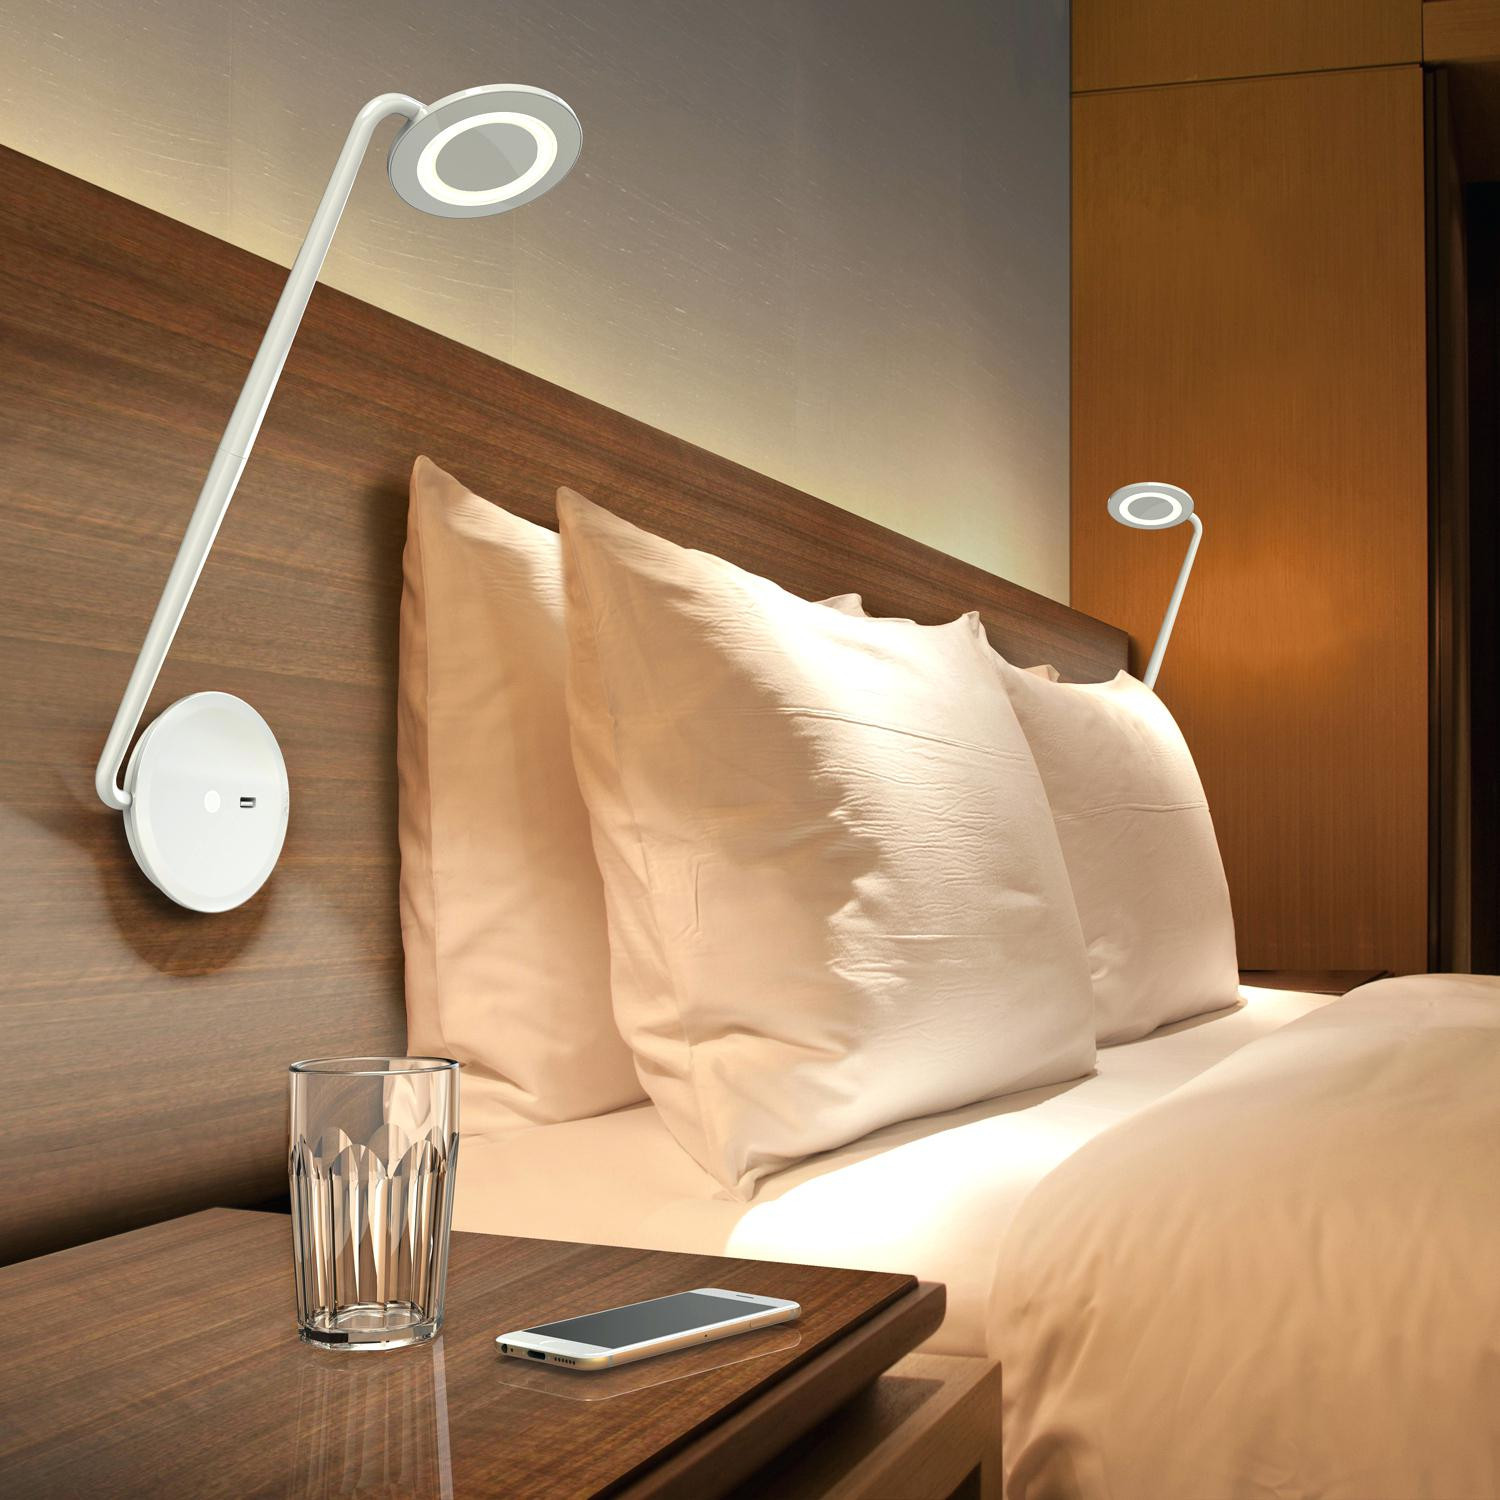 Wall Mounted Lights For Bedroom
 Wall Mounted Bedroom Reading Lights Design Bed Mount Lamps